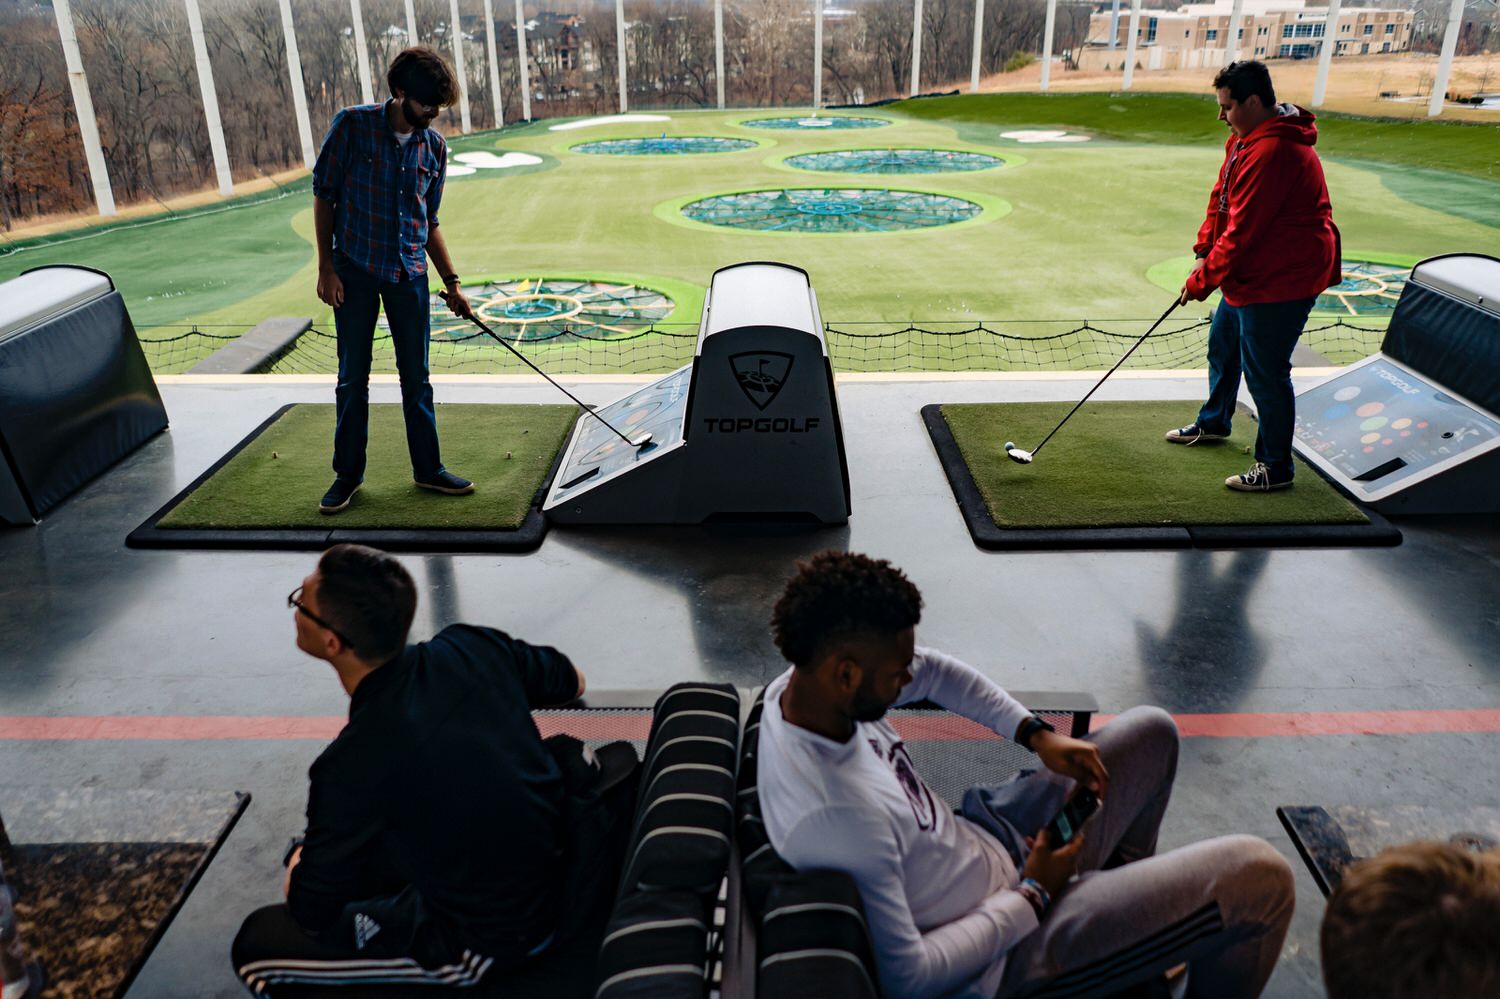 A colorful, candid picture of two men teeing up to hit a golf ball as a group of others watch on, on the morning of a rainy winter wedding at the Kansas City venue, The Station. 